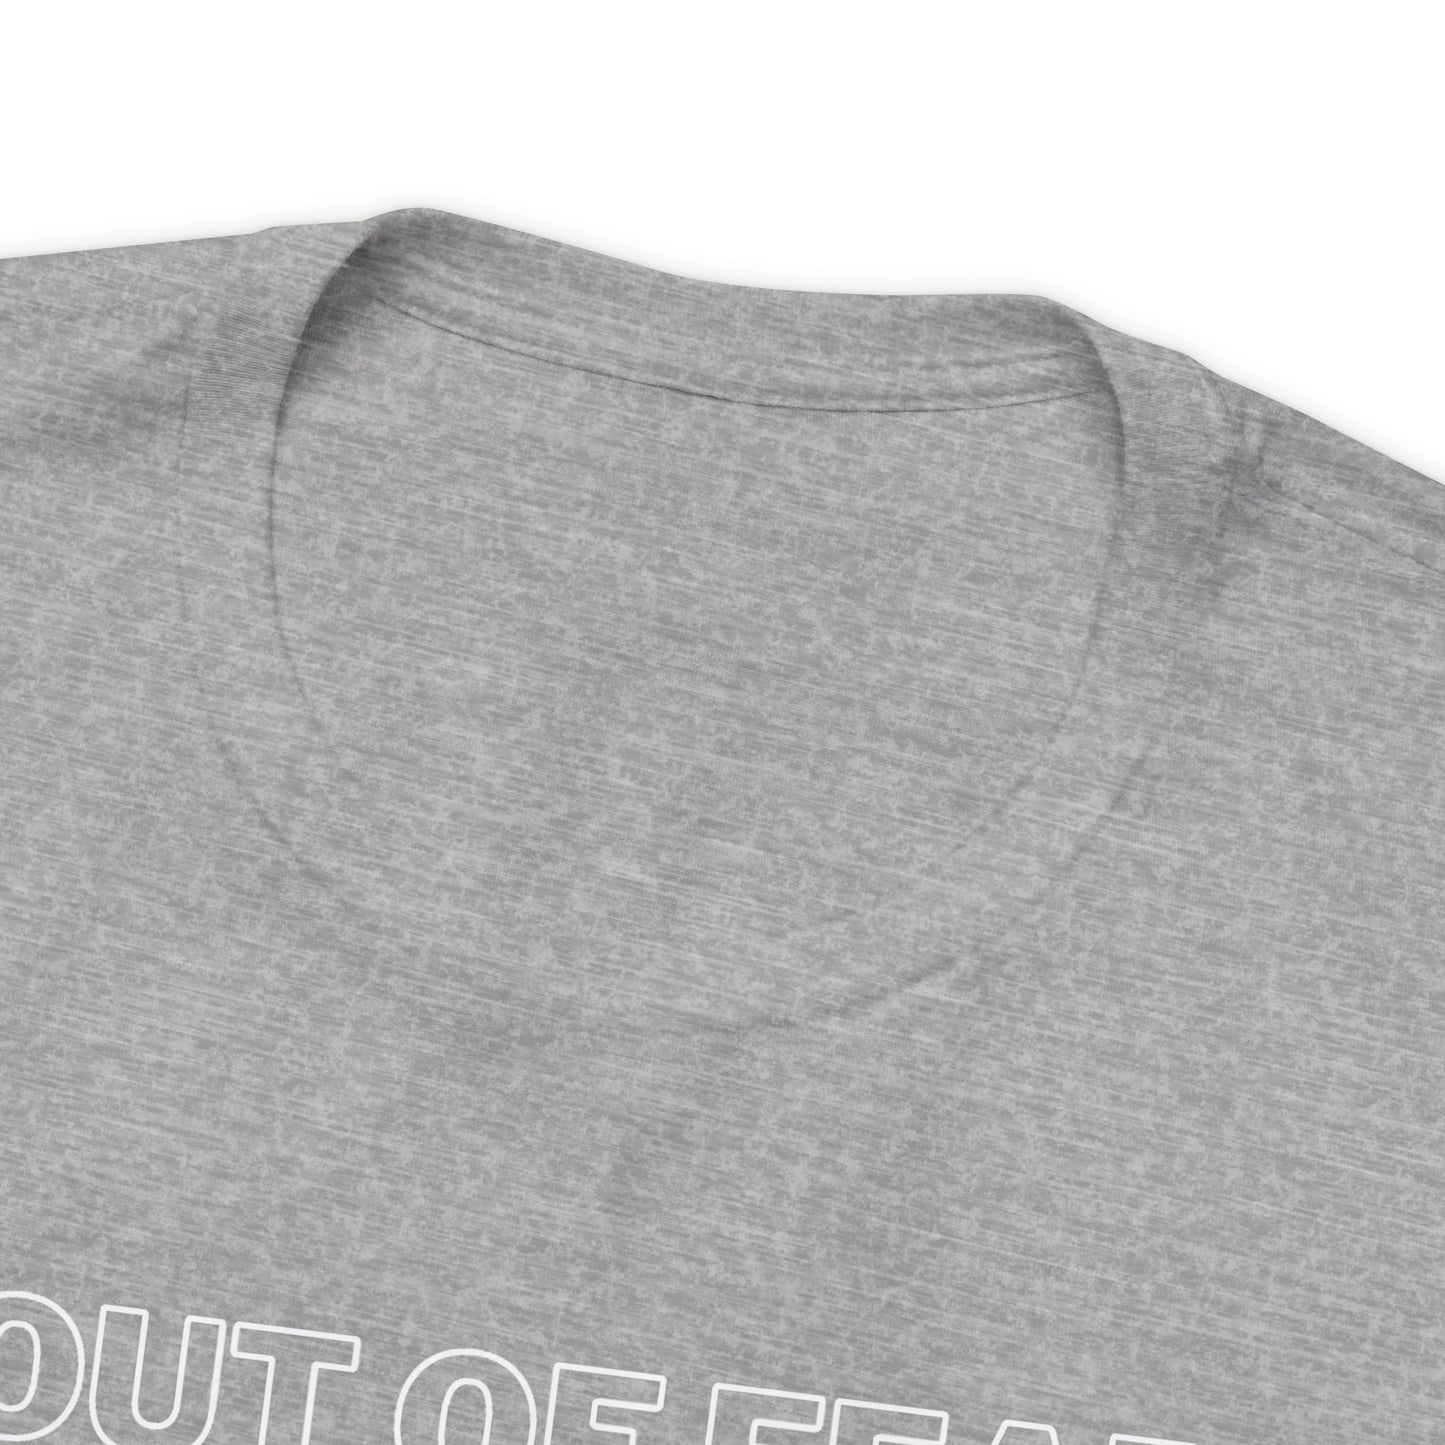 Out of Fear/Into Freedom Tee